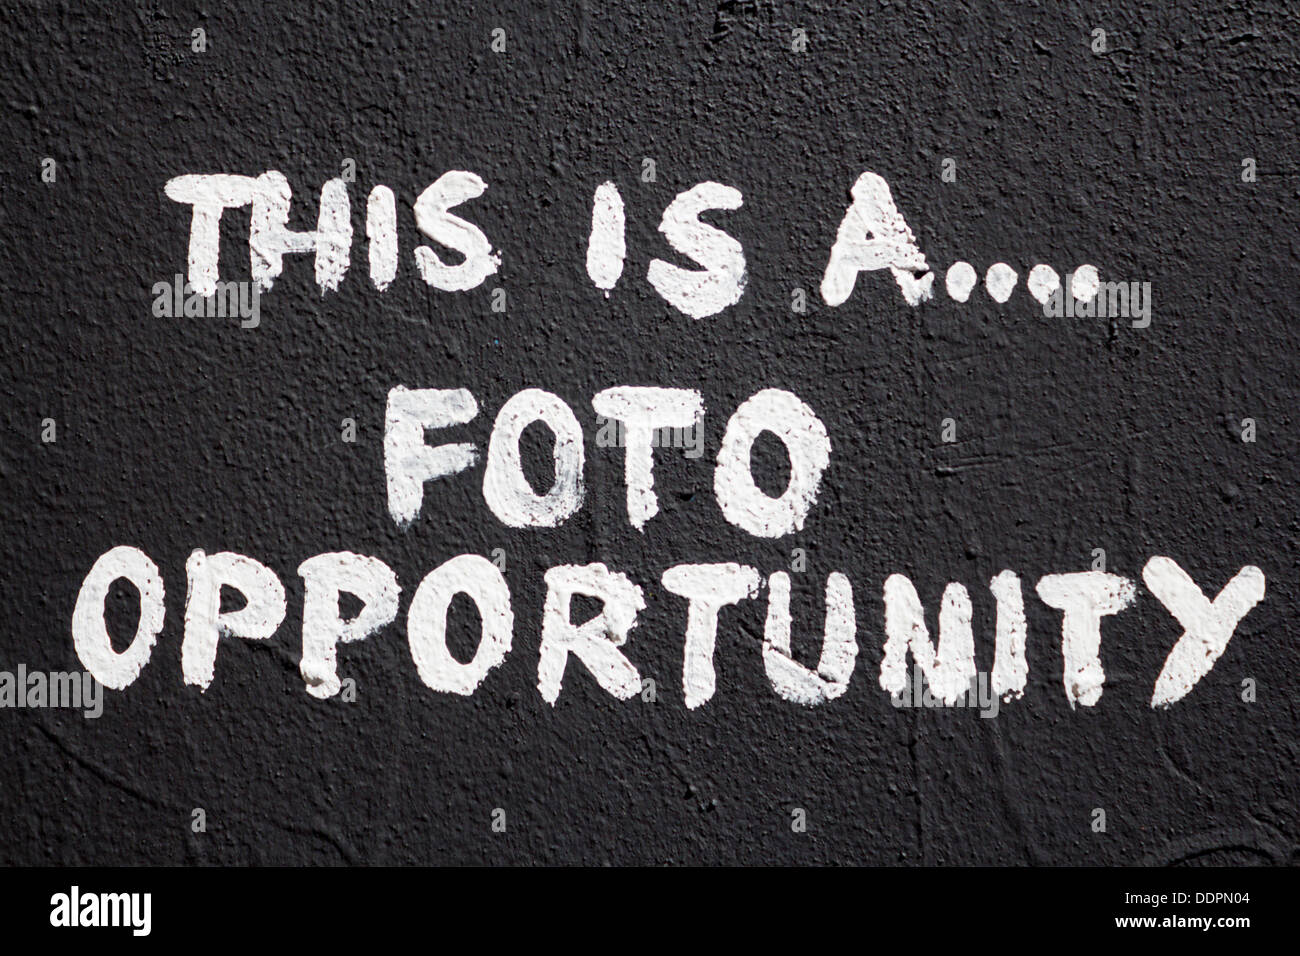 'This is a foto photo opportunity' artwork mural graffiti on wall Berlin Germany Stock Photo